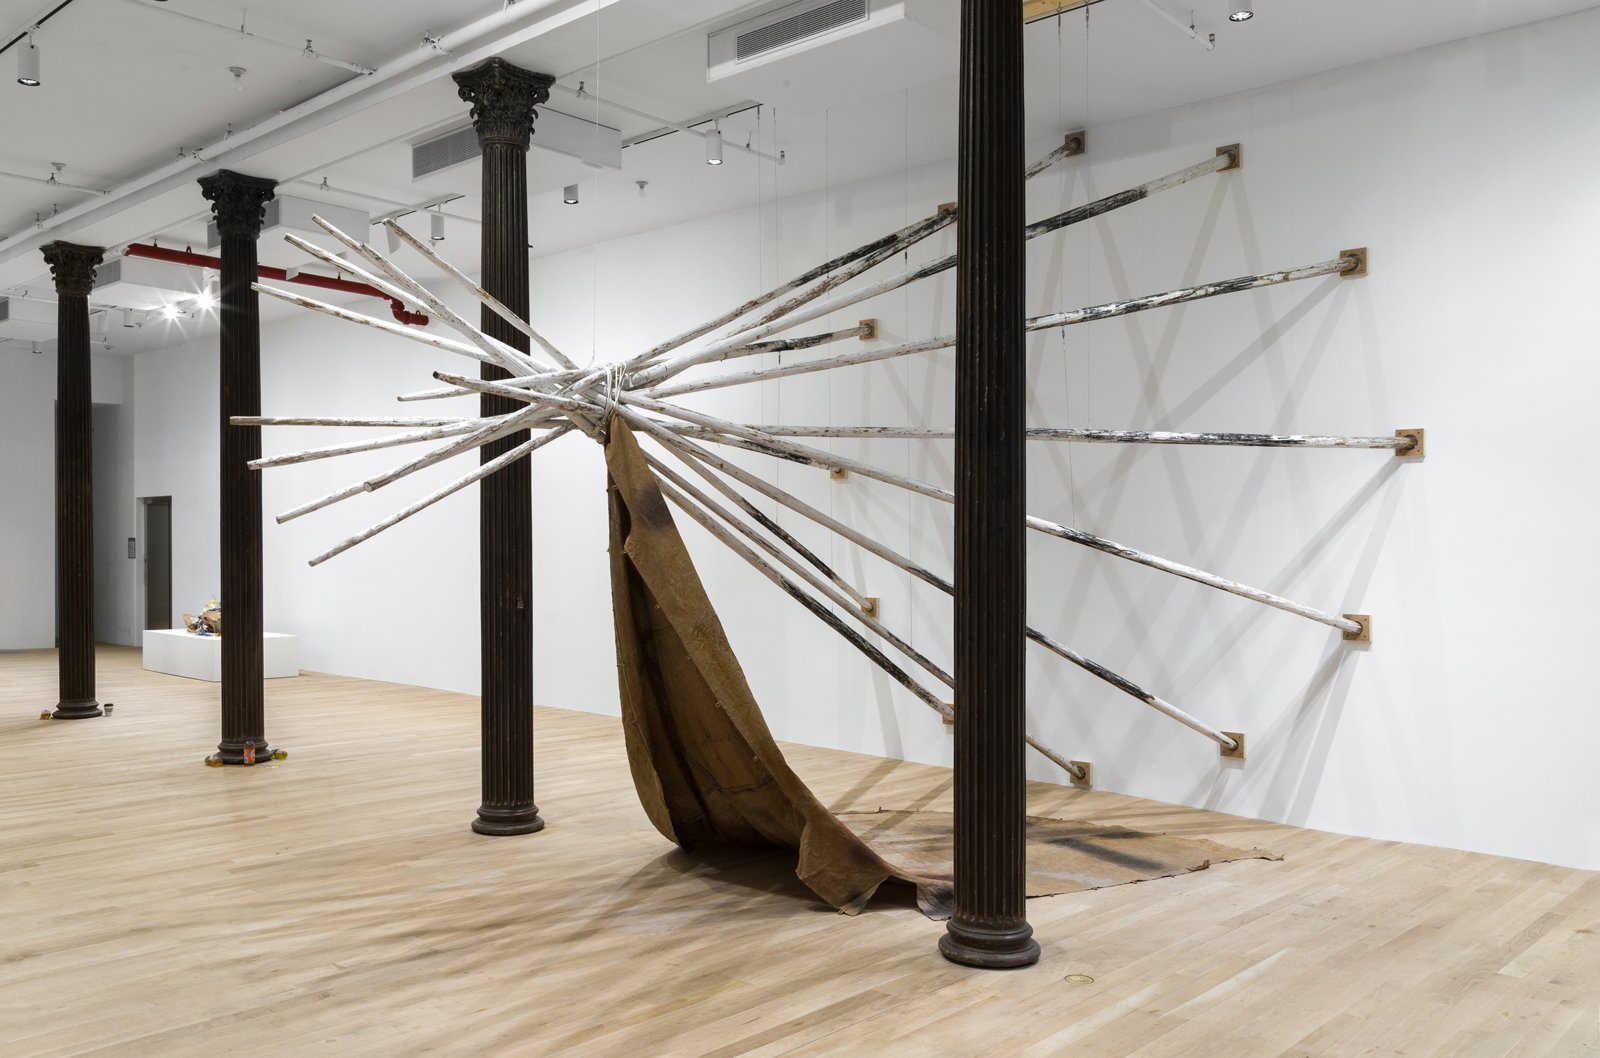 Duane Linklater, dislodgevanishskinground, 2019, 12 tipi poles, steel cable, white paint, charcoal, rope, digital print on linen, black tea, blueberry extract, sumac, charcoal, 220 x 174 x 174 in. (559 x 442 x 442 cm). Installation view, Artists Space, New York, USA, 2019